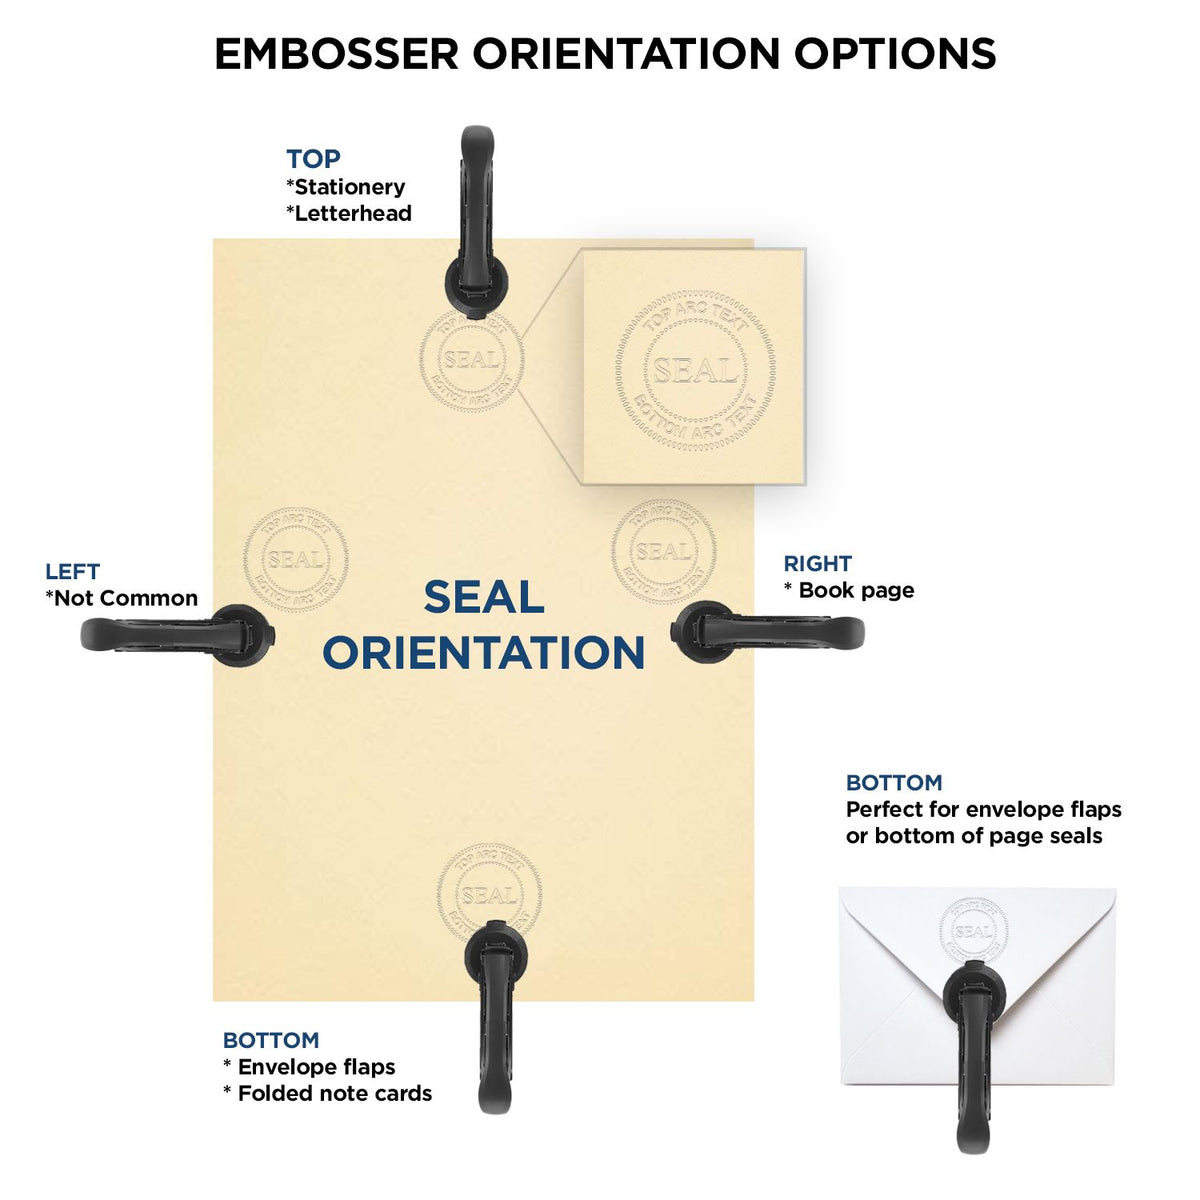 An infographic for the Long Reach Arkansas Land Surveyor Seal showing embosser orientation, this is showing examples of a top, bottom, right and left insert.